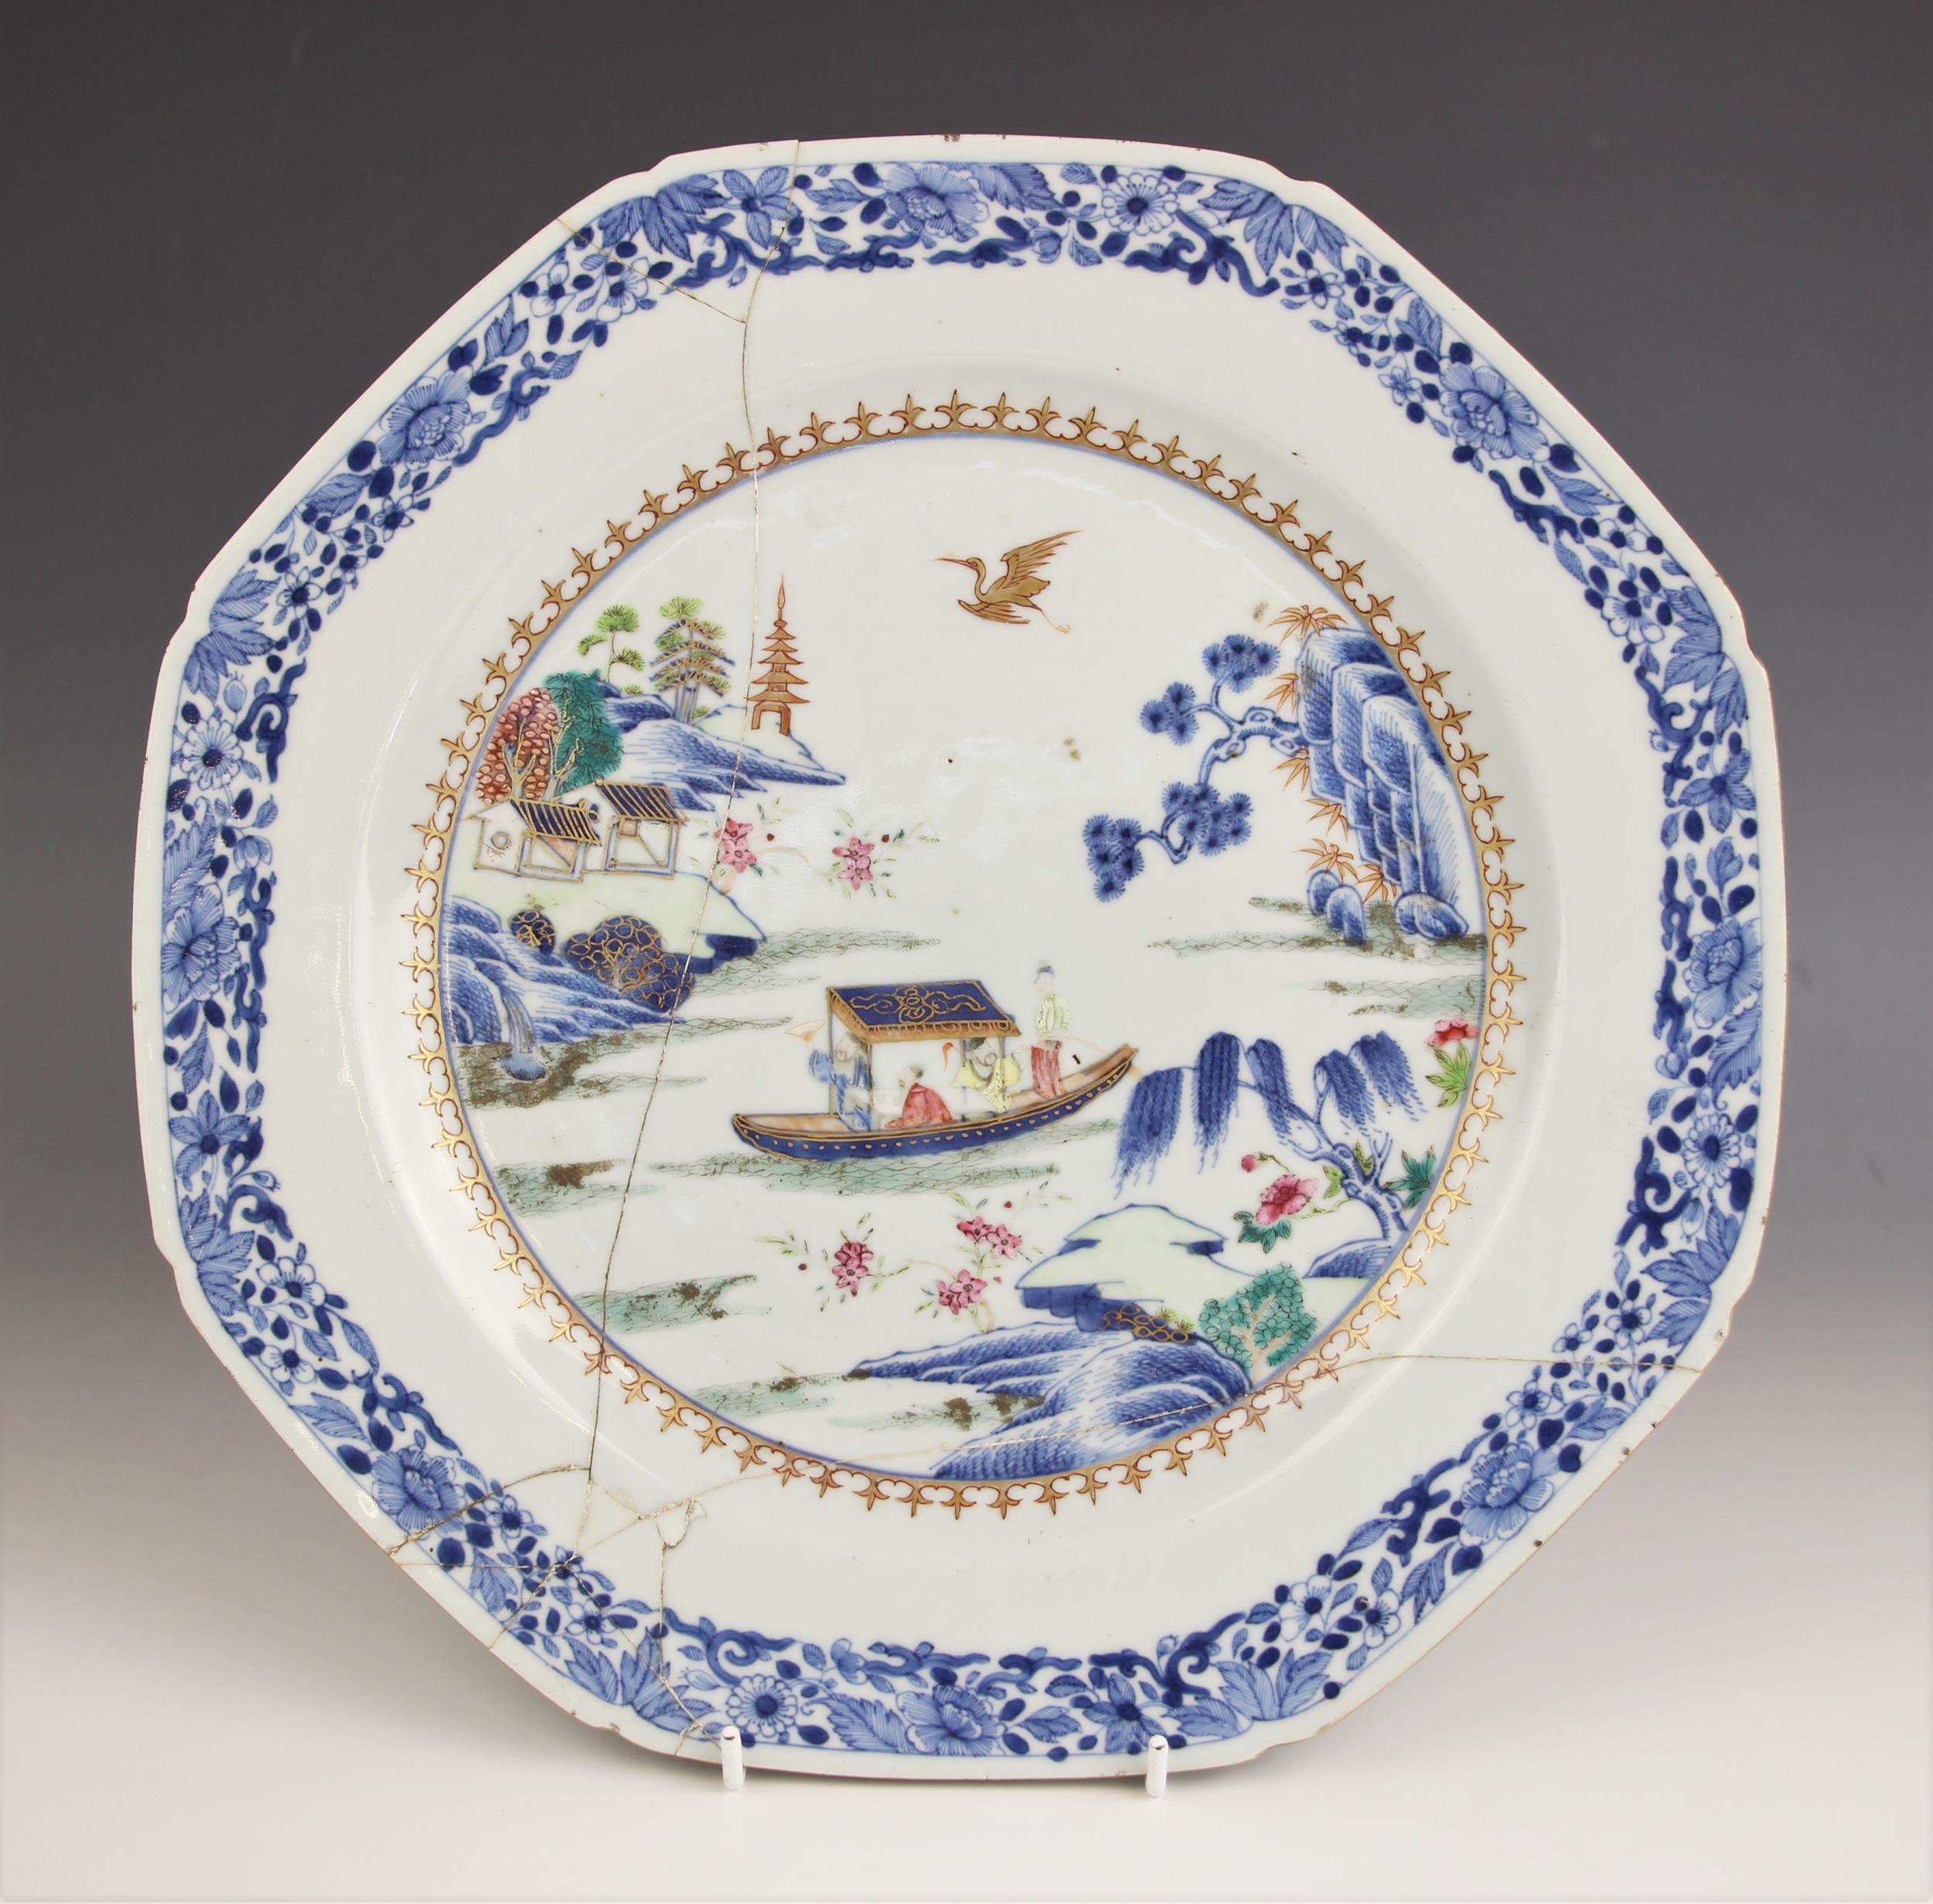 A Chinese export porcelain charger, Qianlong (1736-1795), the octagonal charger decorated in a